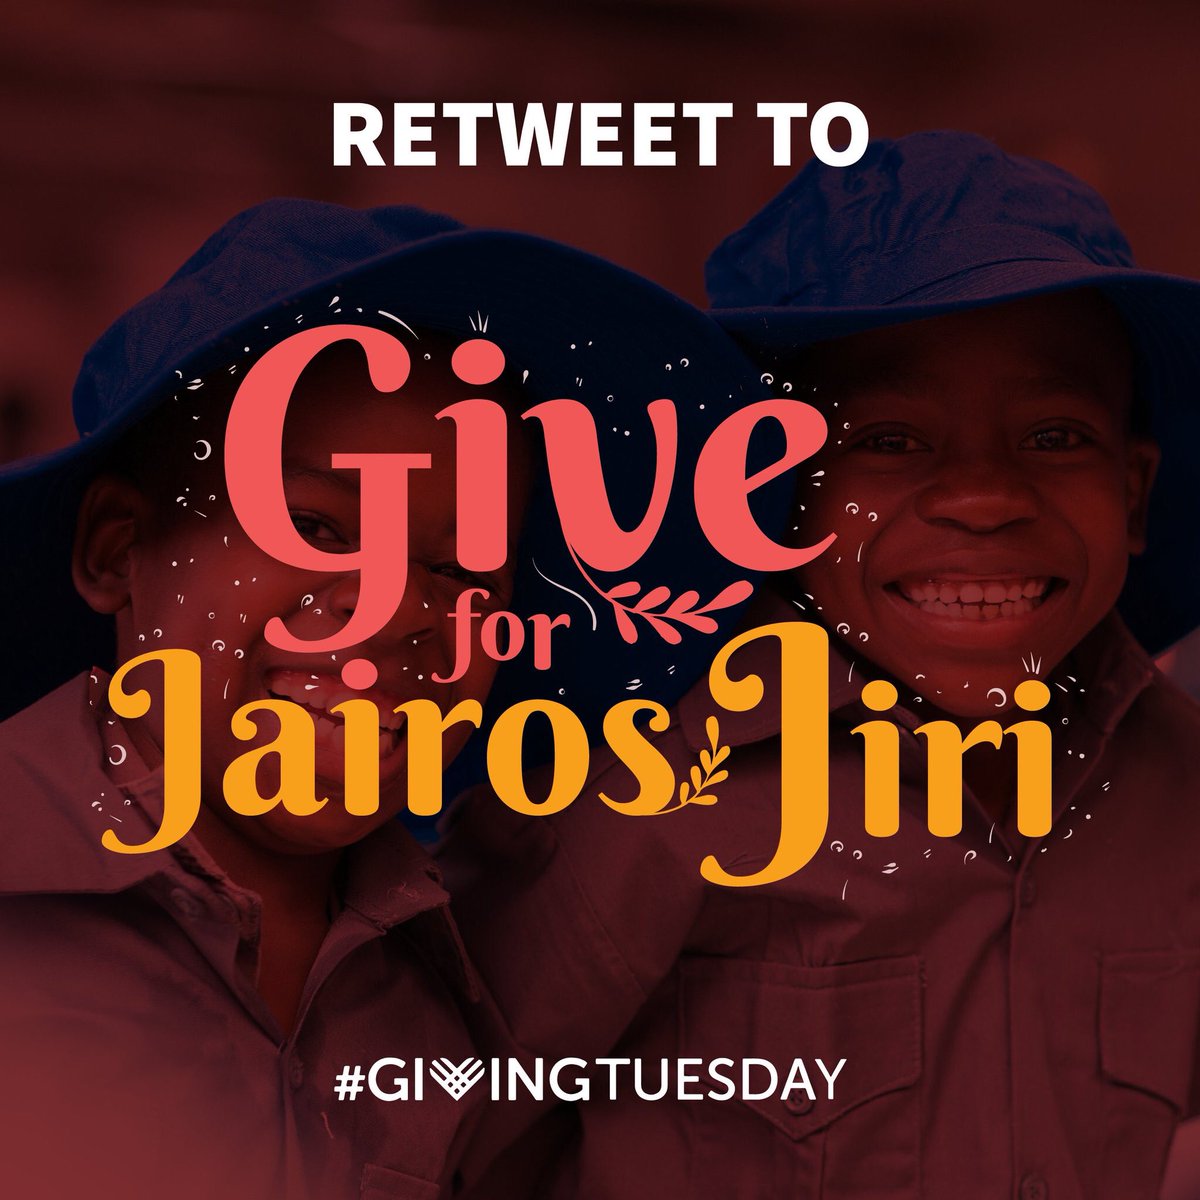 Here’s our 24-hour #givingchallenge - for every like on this post, one of our generous donors will donate a dollar to the Jairos Jiri Centre in Southerton for their new dining hall. So retweet & tag your friends so they can help out too 
🙌🏾 #GiveforJairosJiri #GivingTuesday